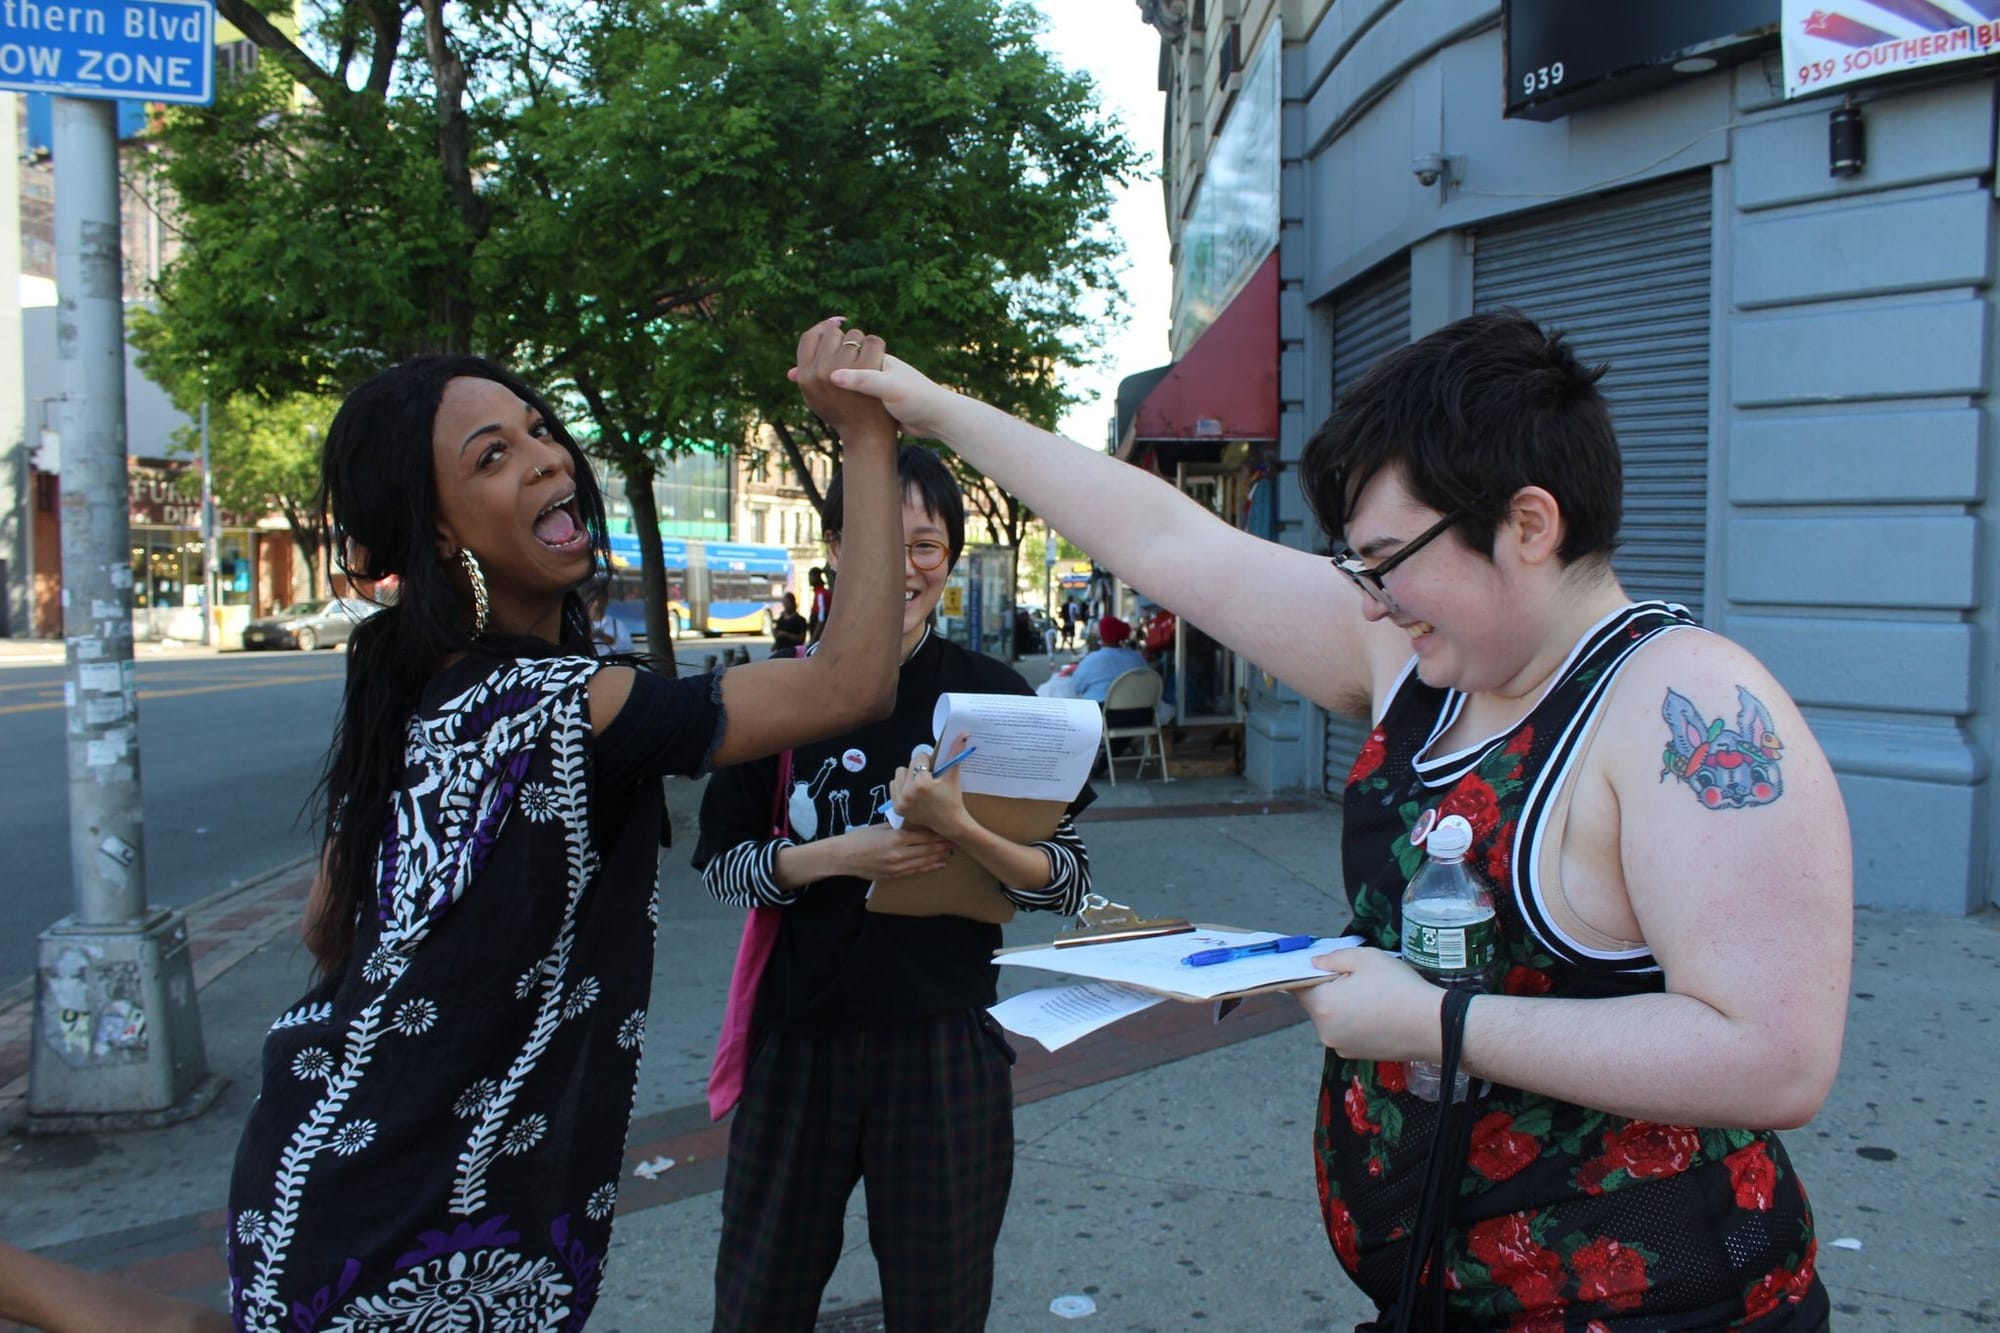 Noah, a white trans man, is shaking hands in victory with Candii, a black trans woman. There is one other canvasser in the background, all holding clipboards.